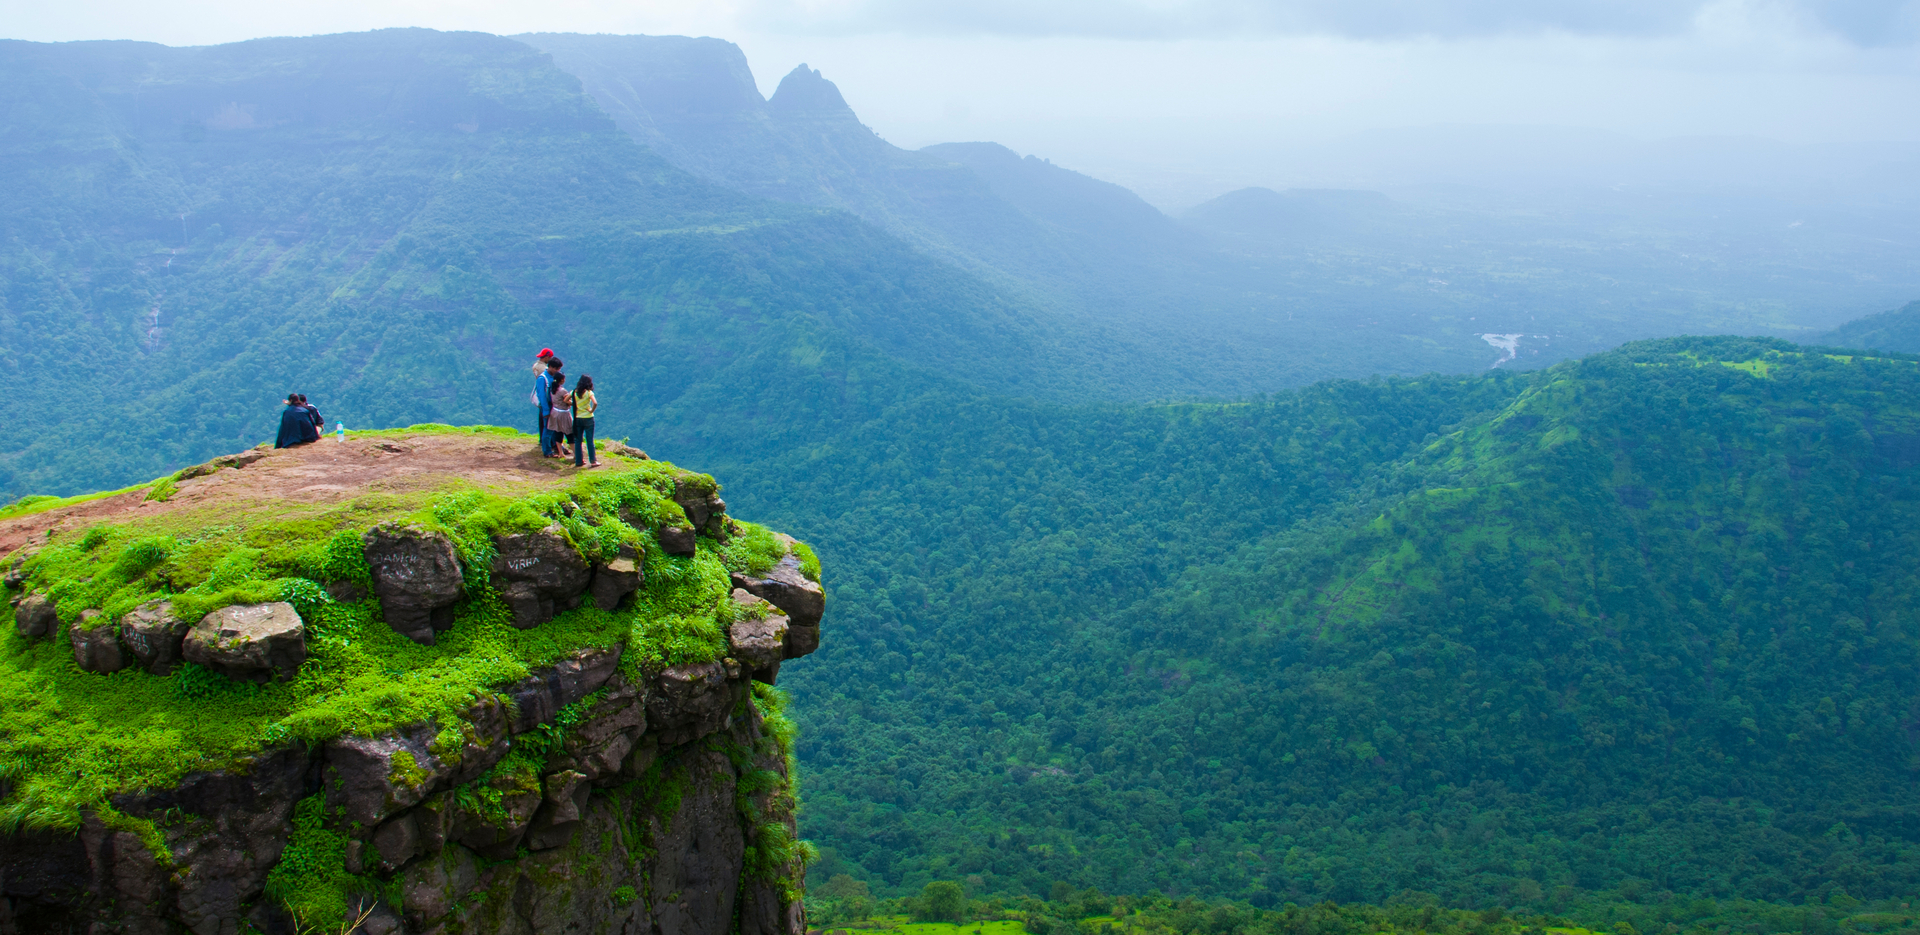 Offbeat hill stations in India